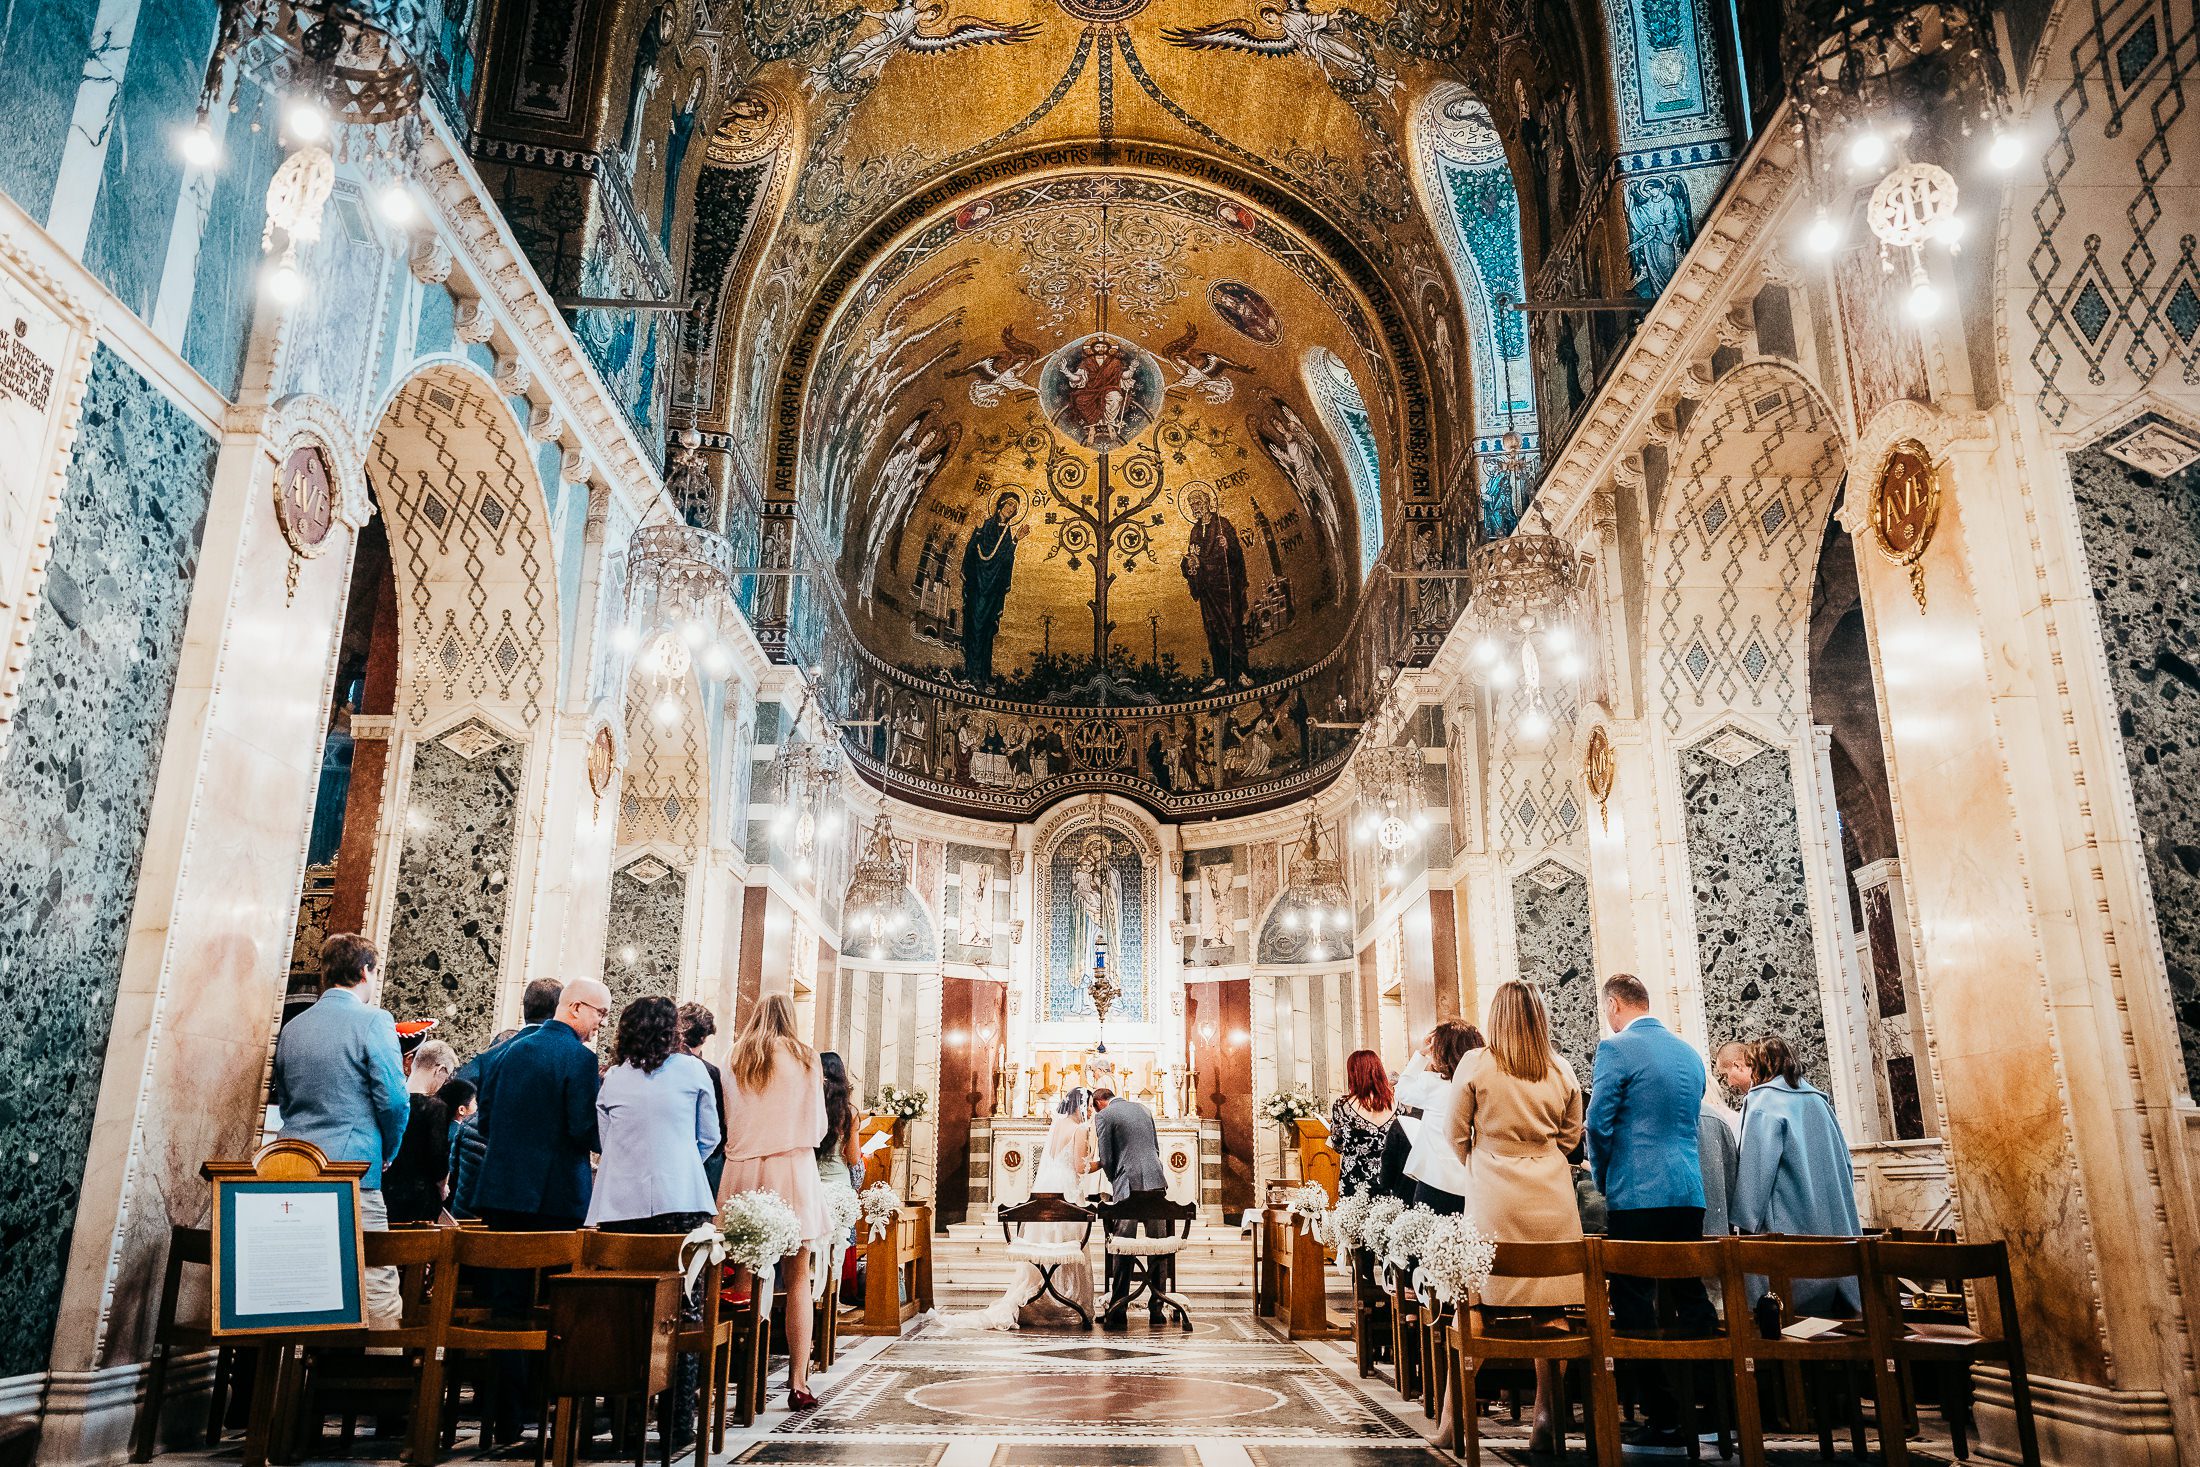 A beautiful May wedding in the grand setting of the Lady Chapel at Westminster Cathedral.